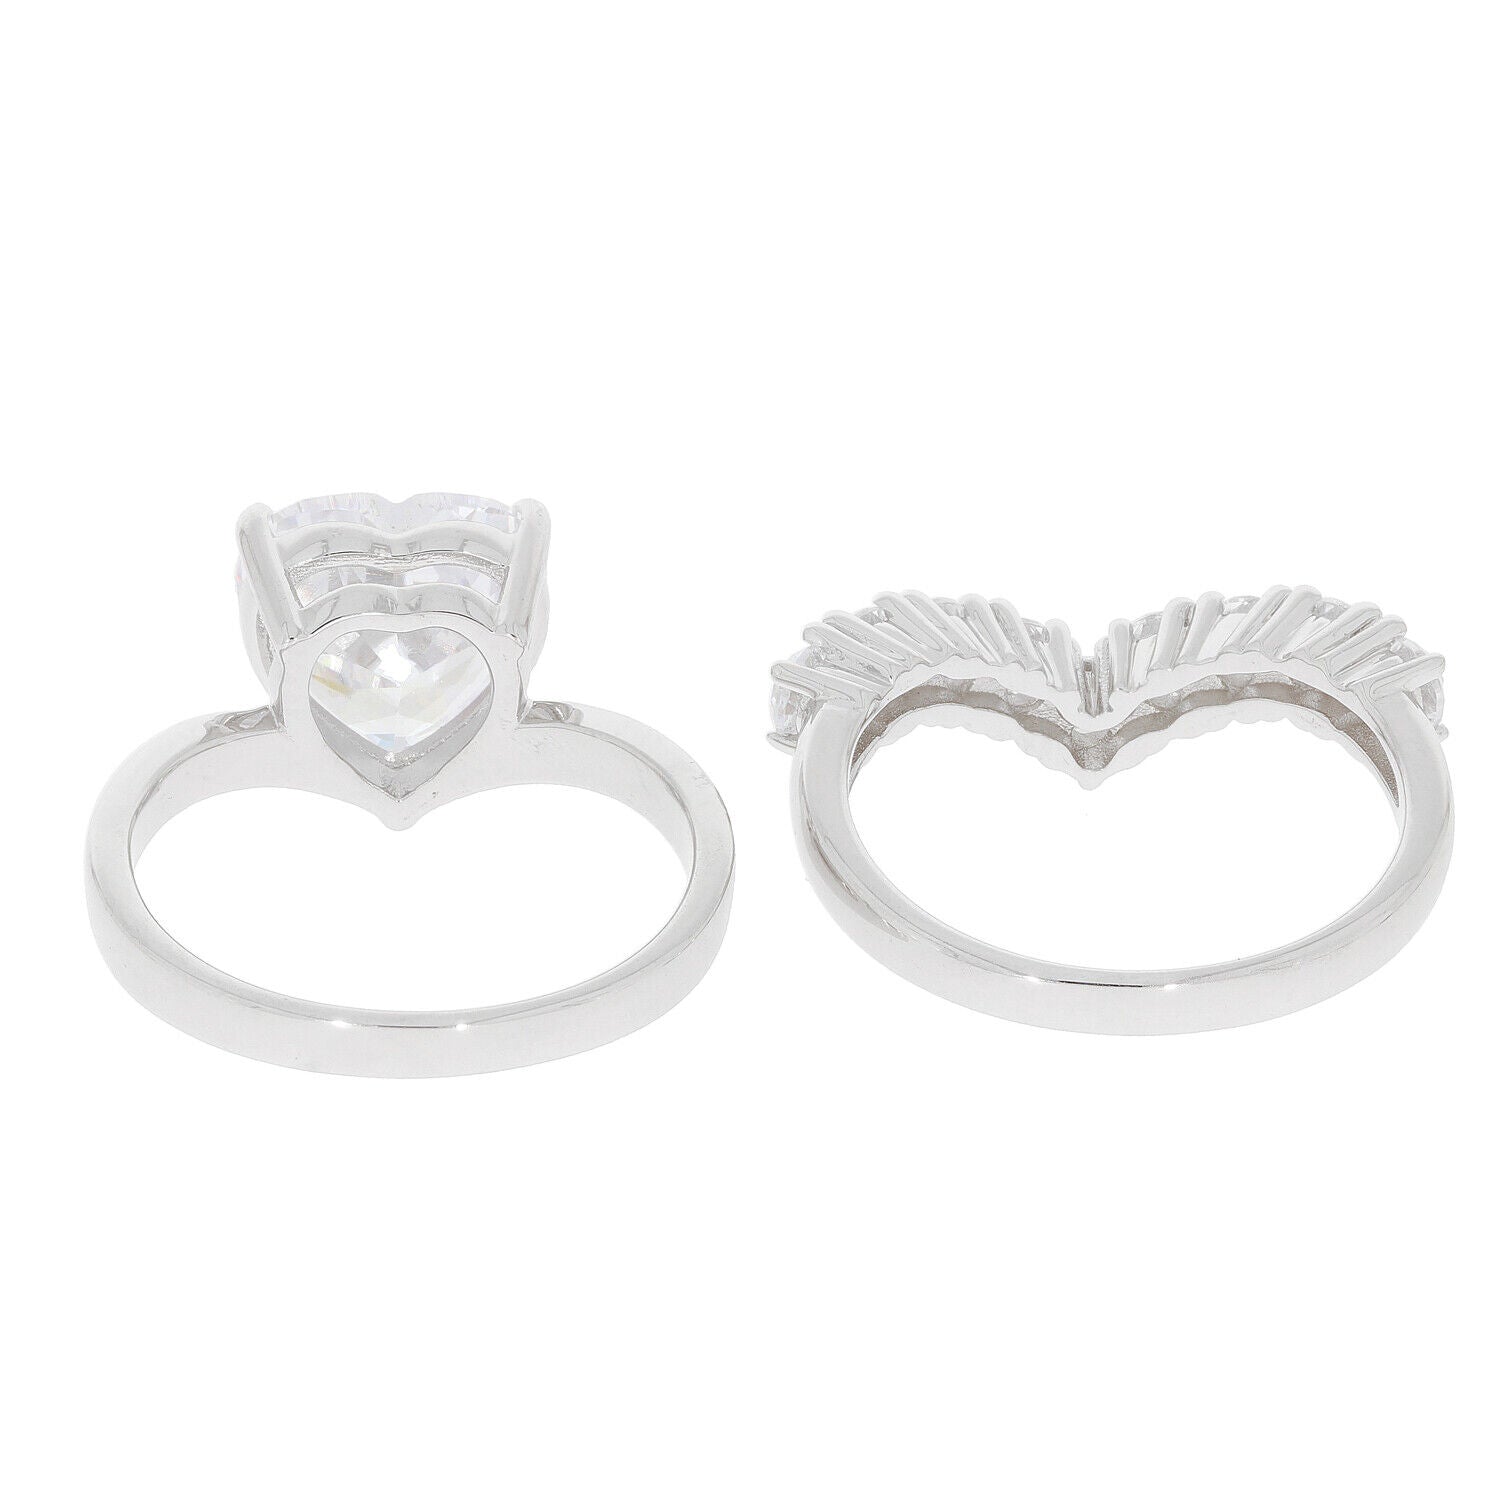 2 Pieces Set Sterling Silver Semi Mount Ring Setting Heart HT 10X10mm